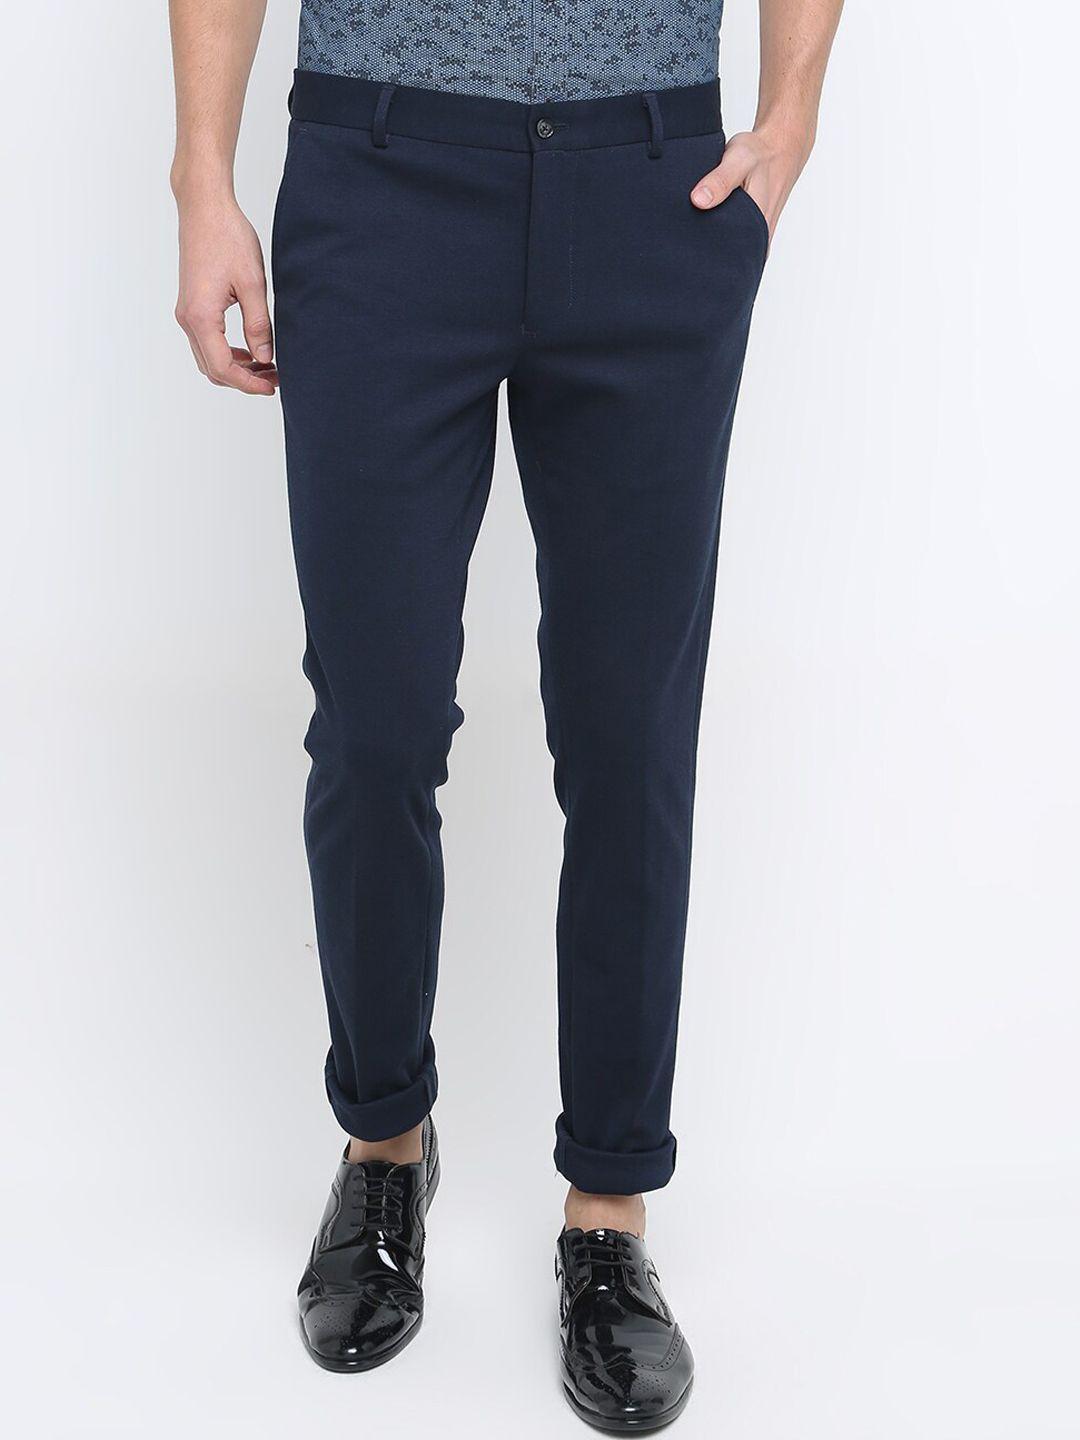 basics men navy blue tapered fit chinos trousers